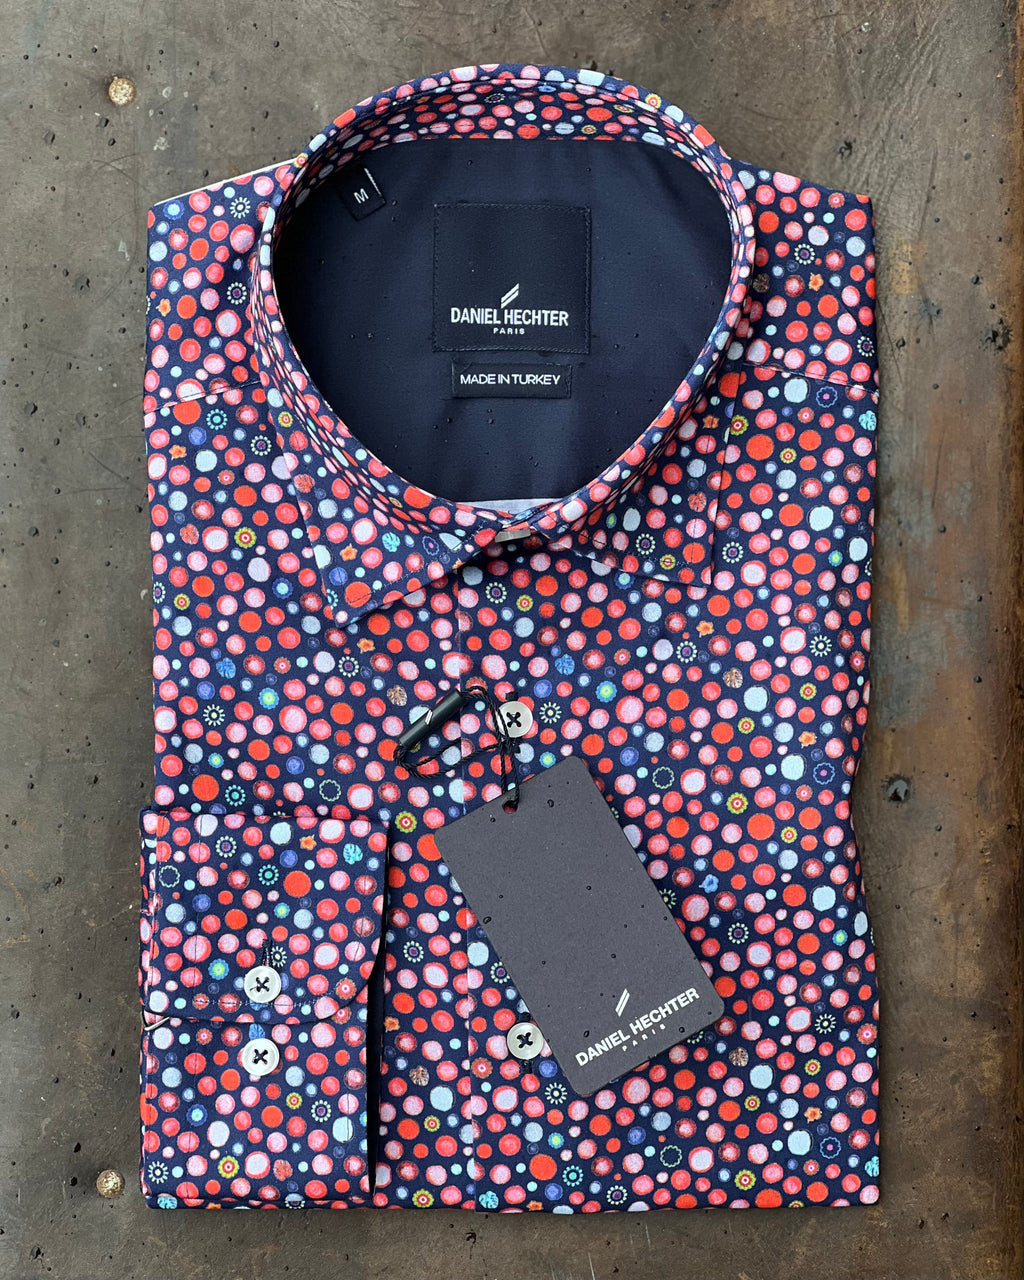 Colourful patterned long-sleeve shirt by Daniel Hechter